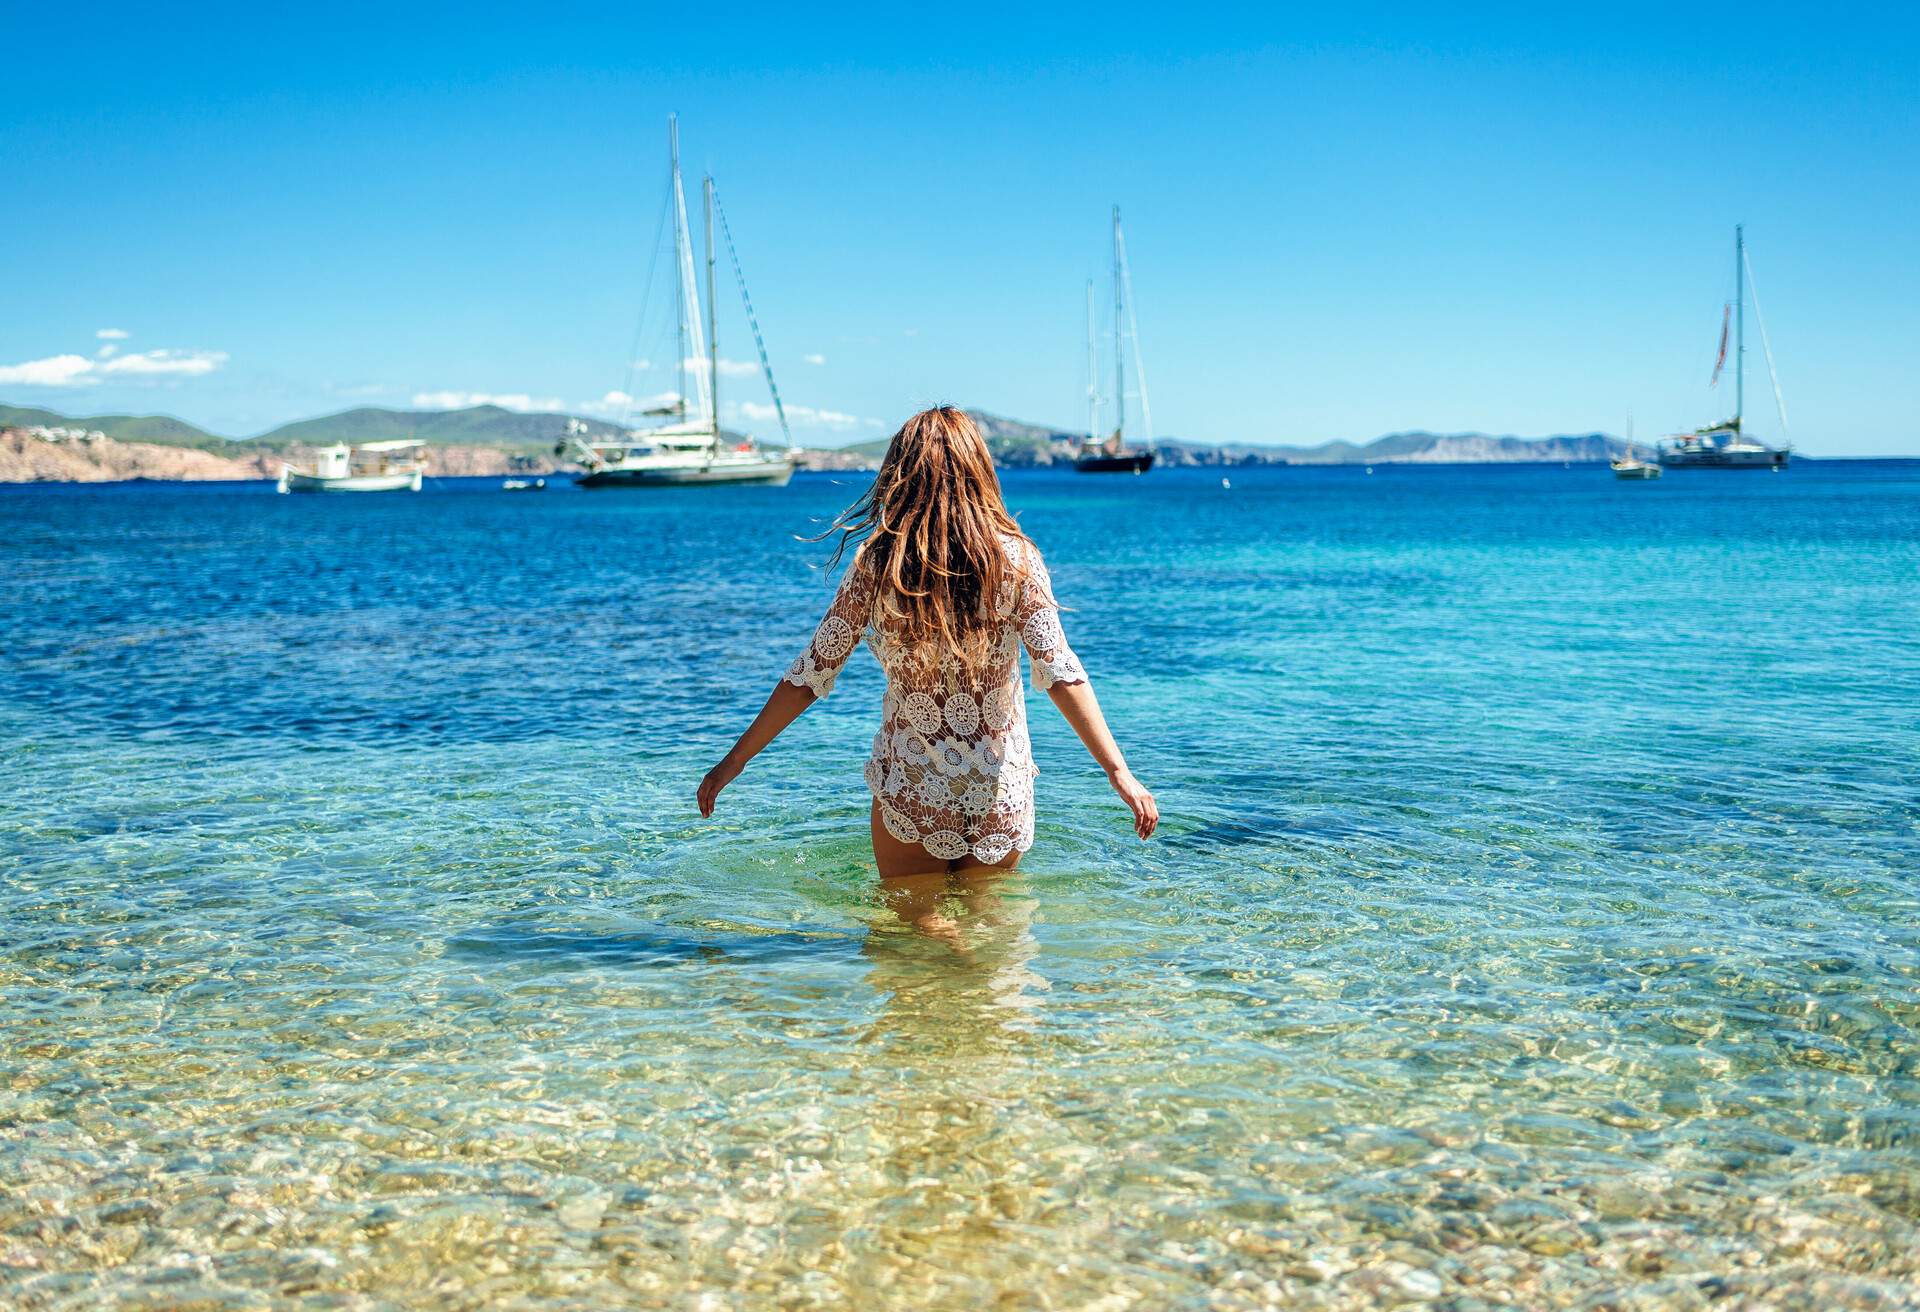 Woman from behind in the water at Llentrisca Beach in Ibiza, Balearic Islands, Spain.